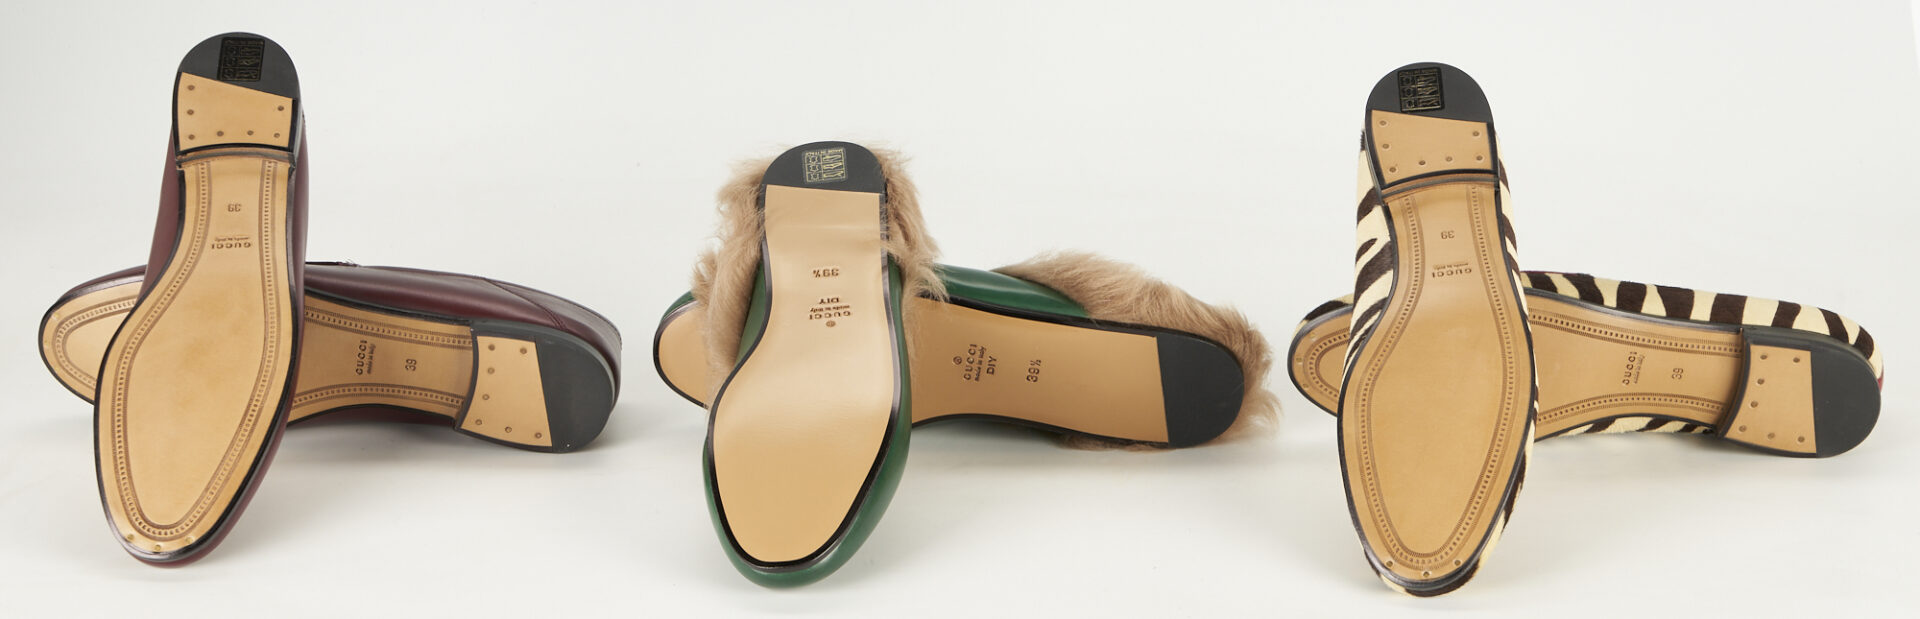 Lot 788: 3 Pairs Gucci Leather Loafers or Slides